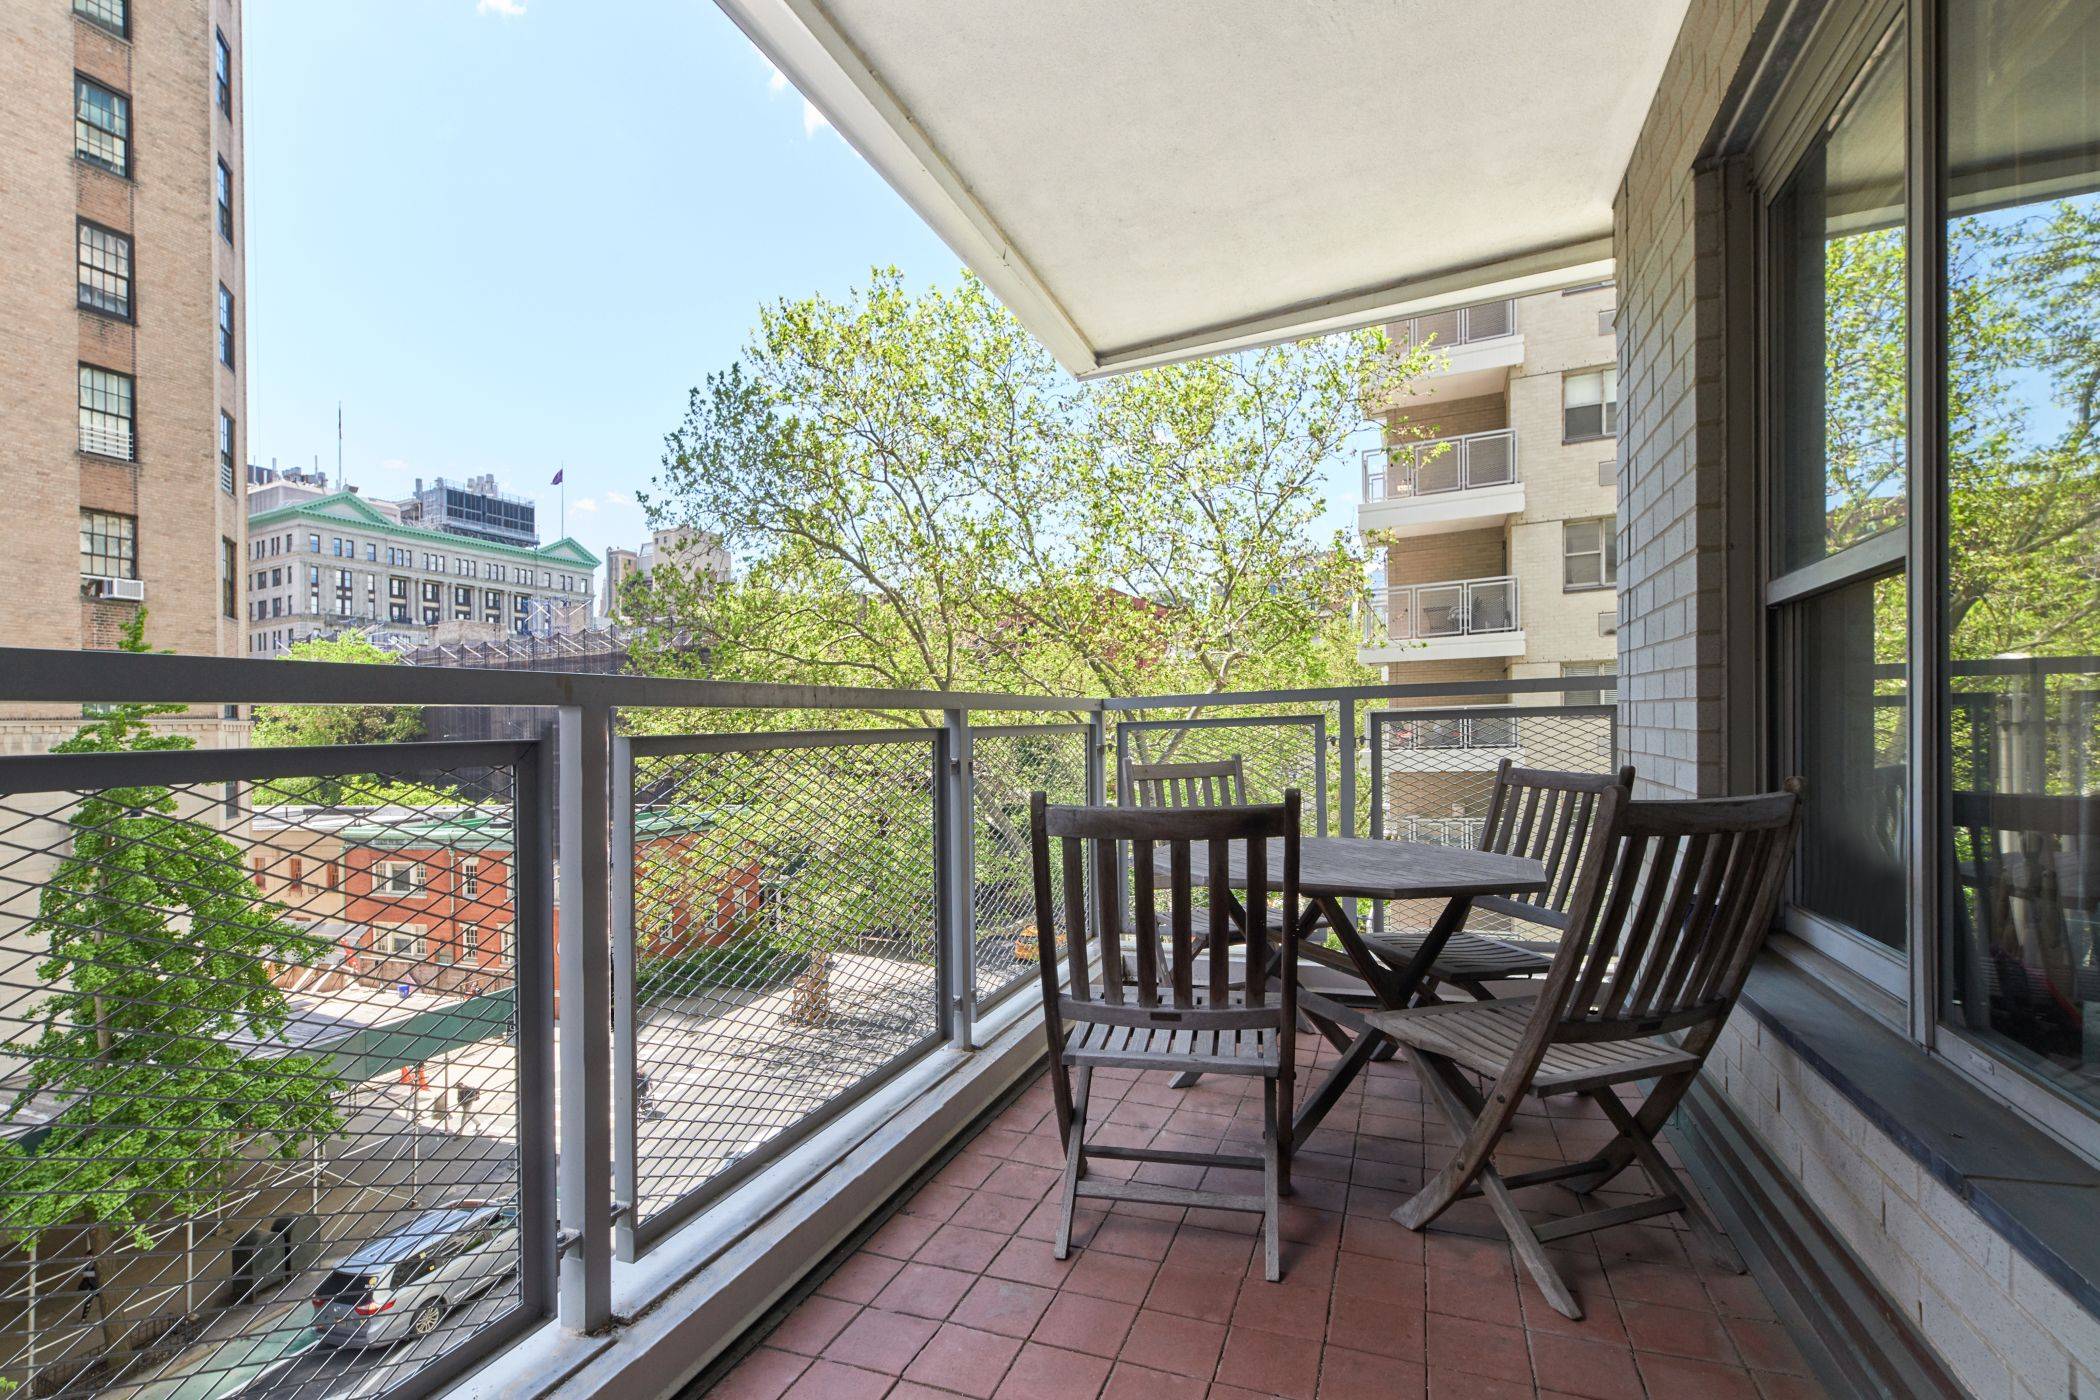 Opportunity is here ! 100, 000 price reduction from a similar apartment sold just one floor above.